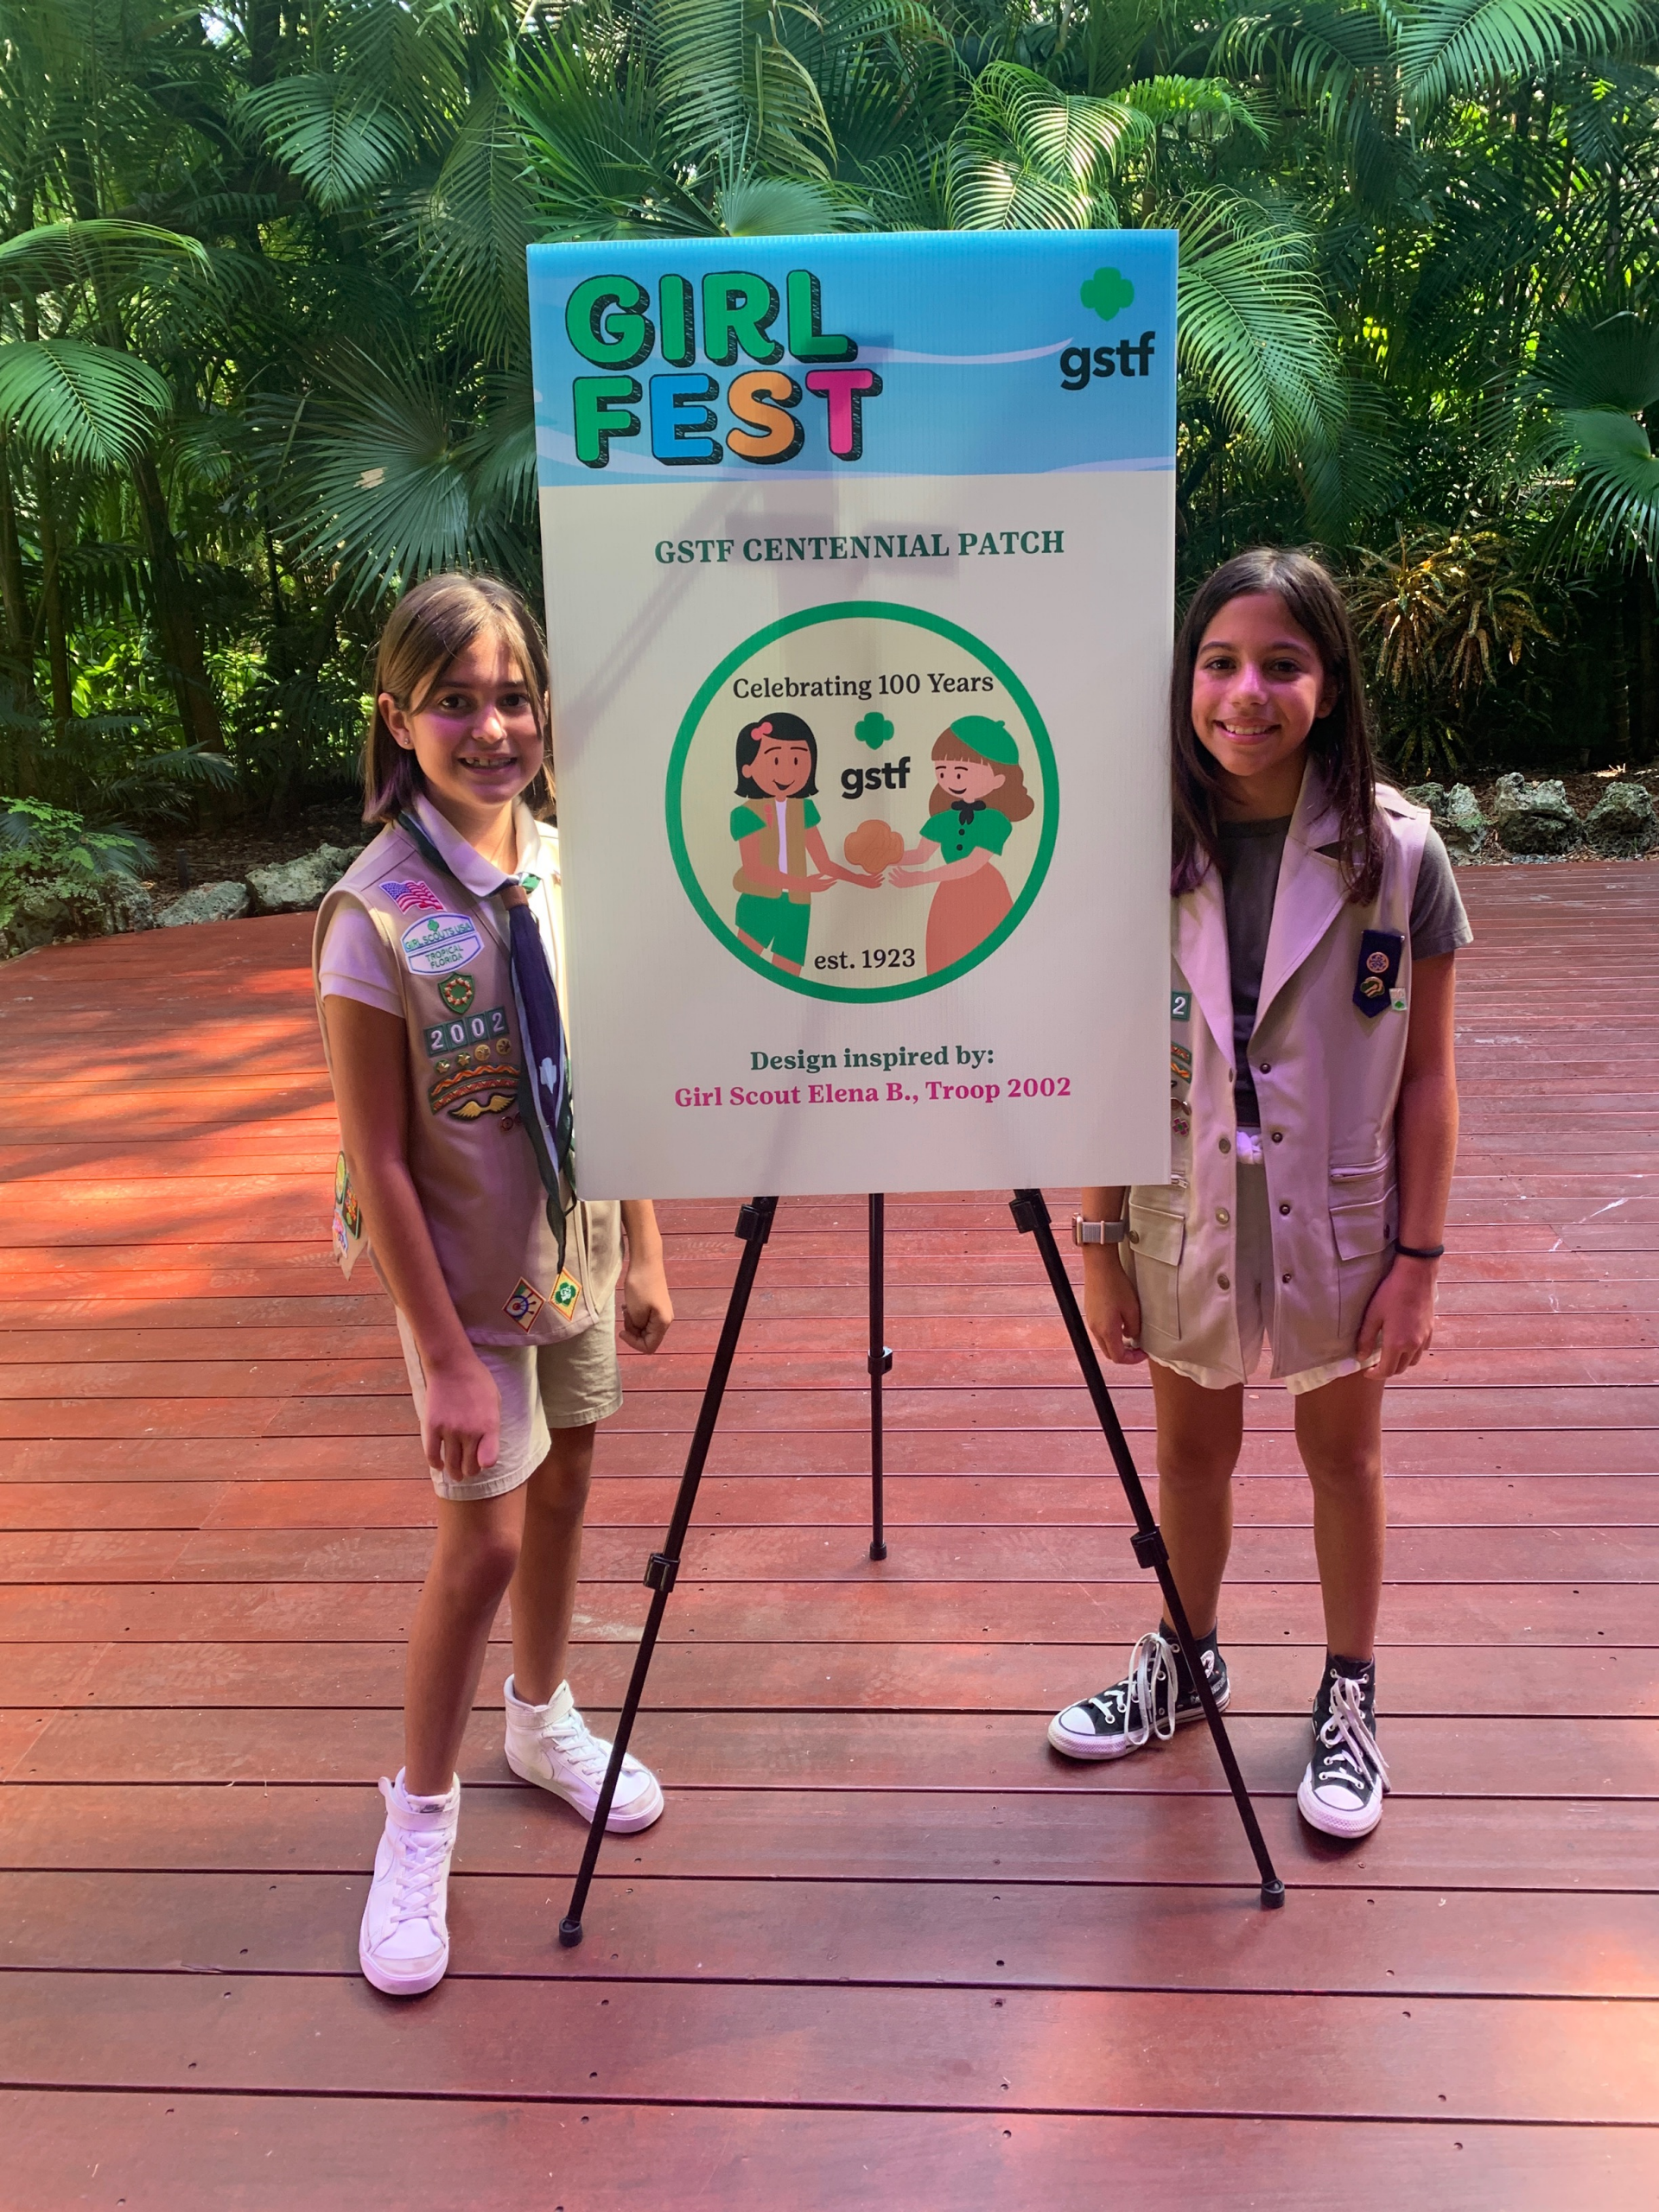 Girl Scout Elena (left) unveiling her winning design for the GSTF Centennial patch contest